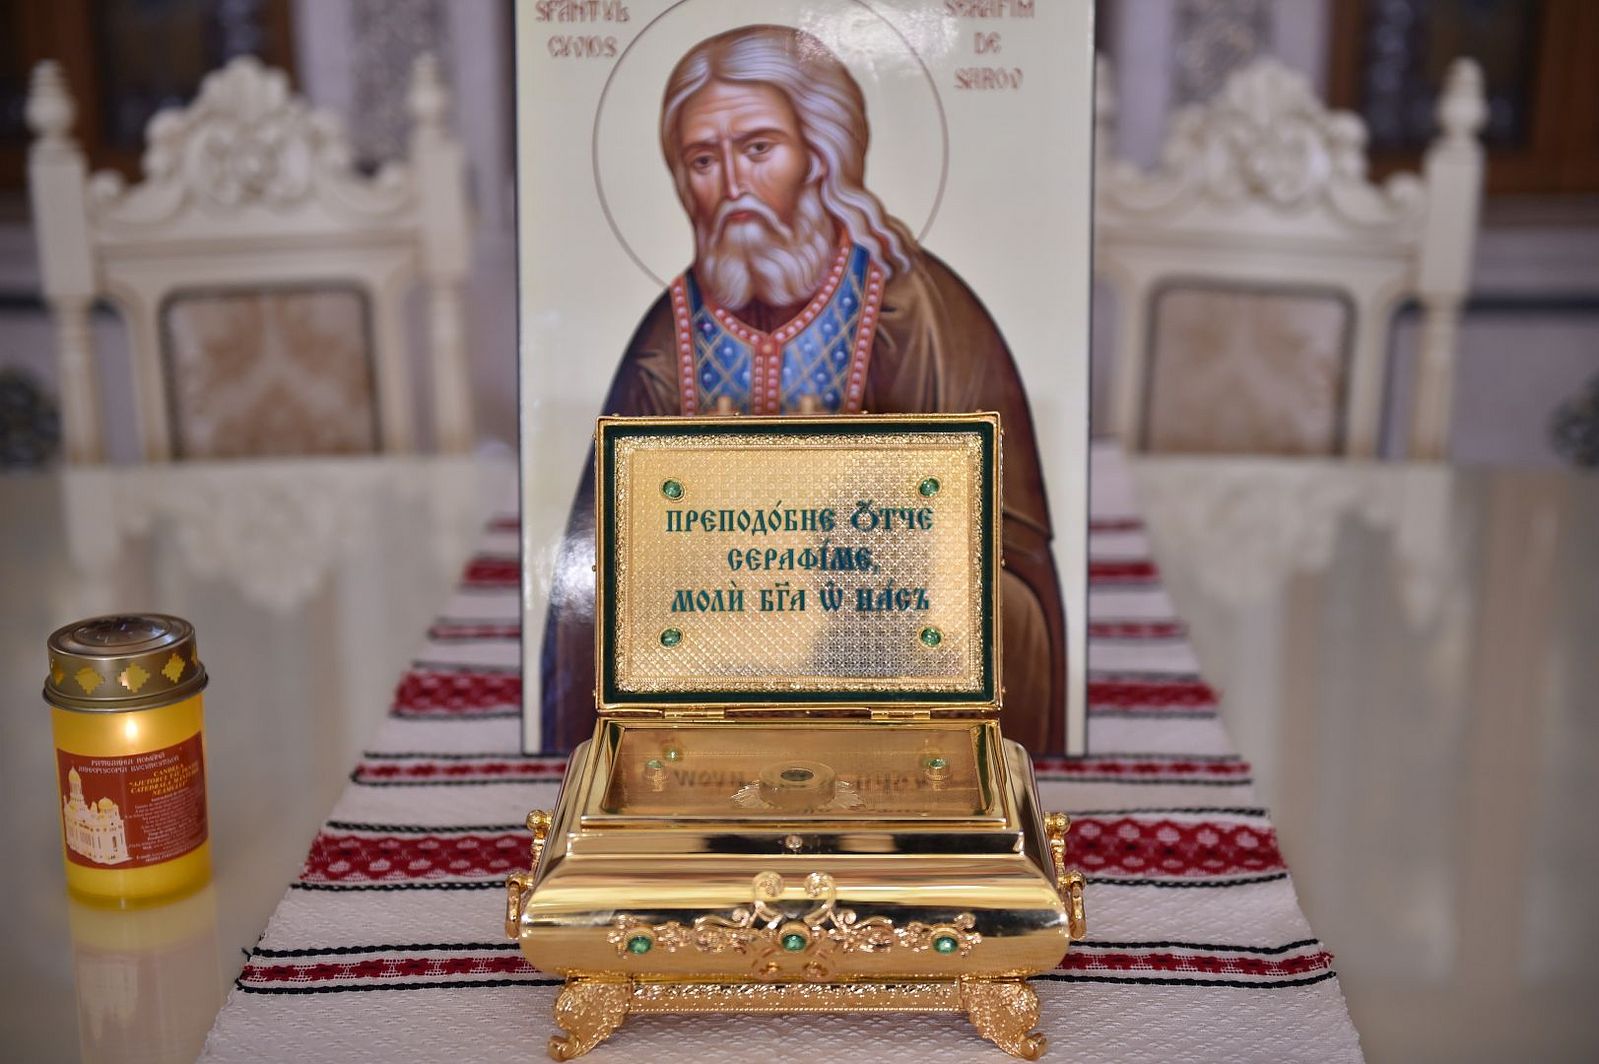 RELICS OF ST. SERAPHIM GIVEN TO RUSSIAN CHURCH IN BUCHAREST